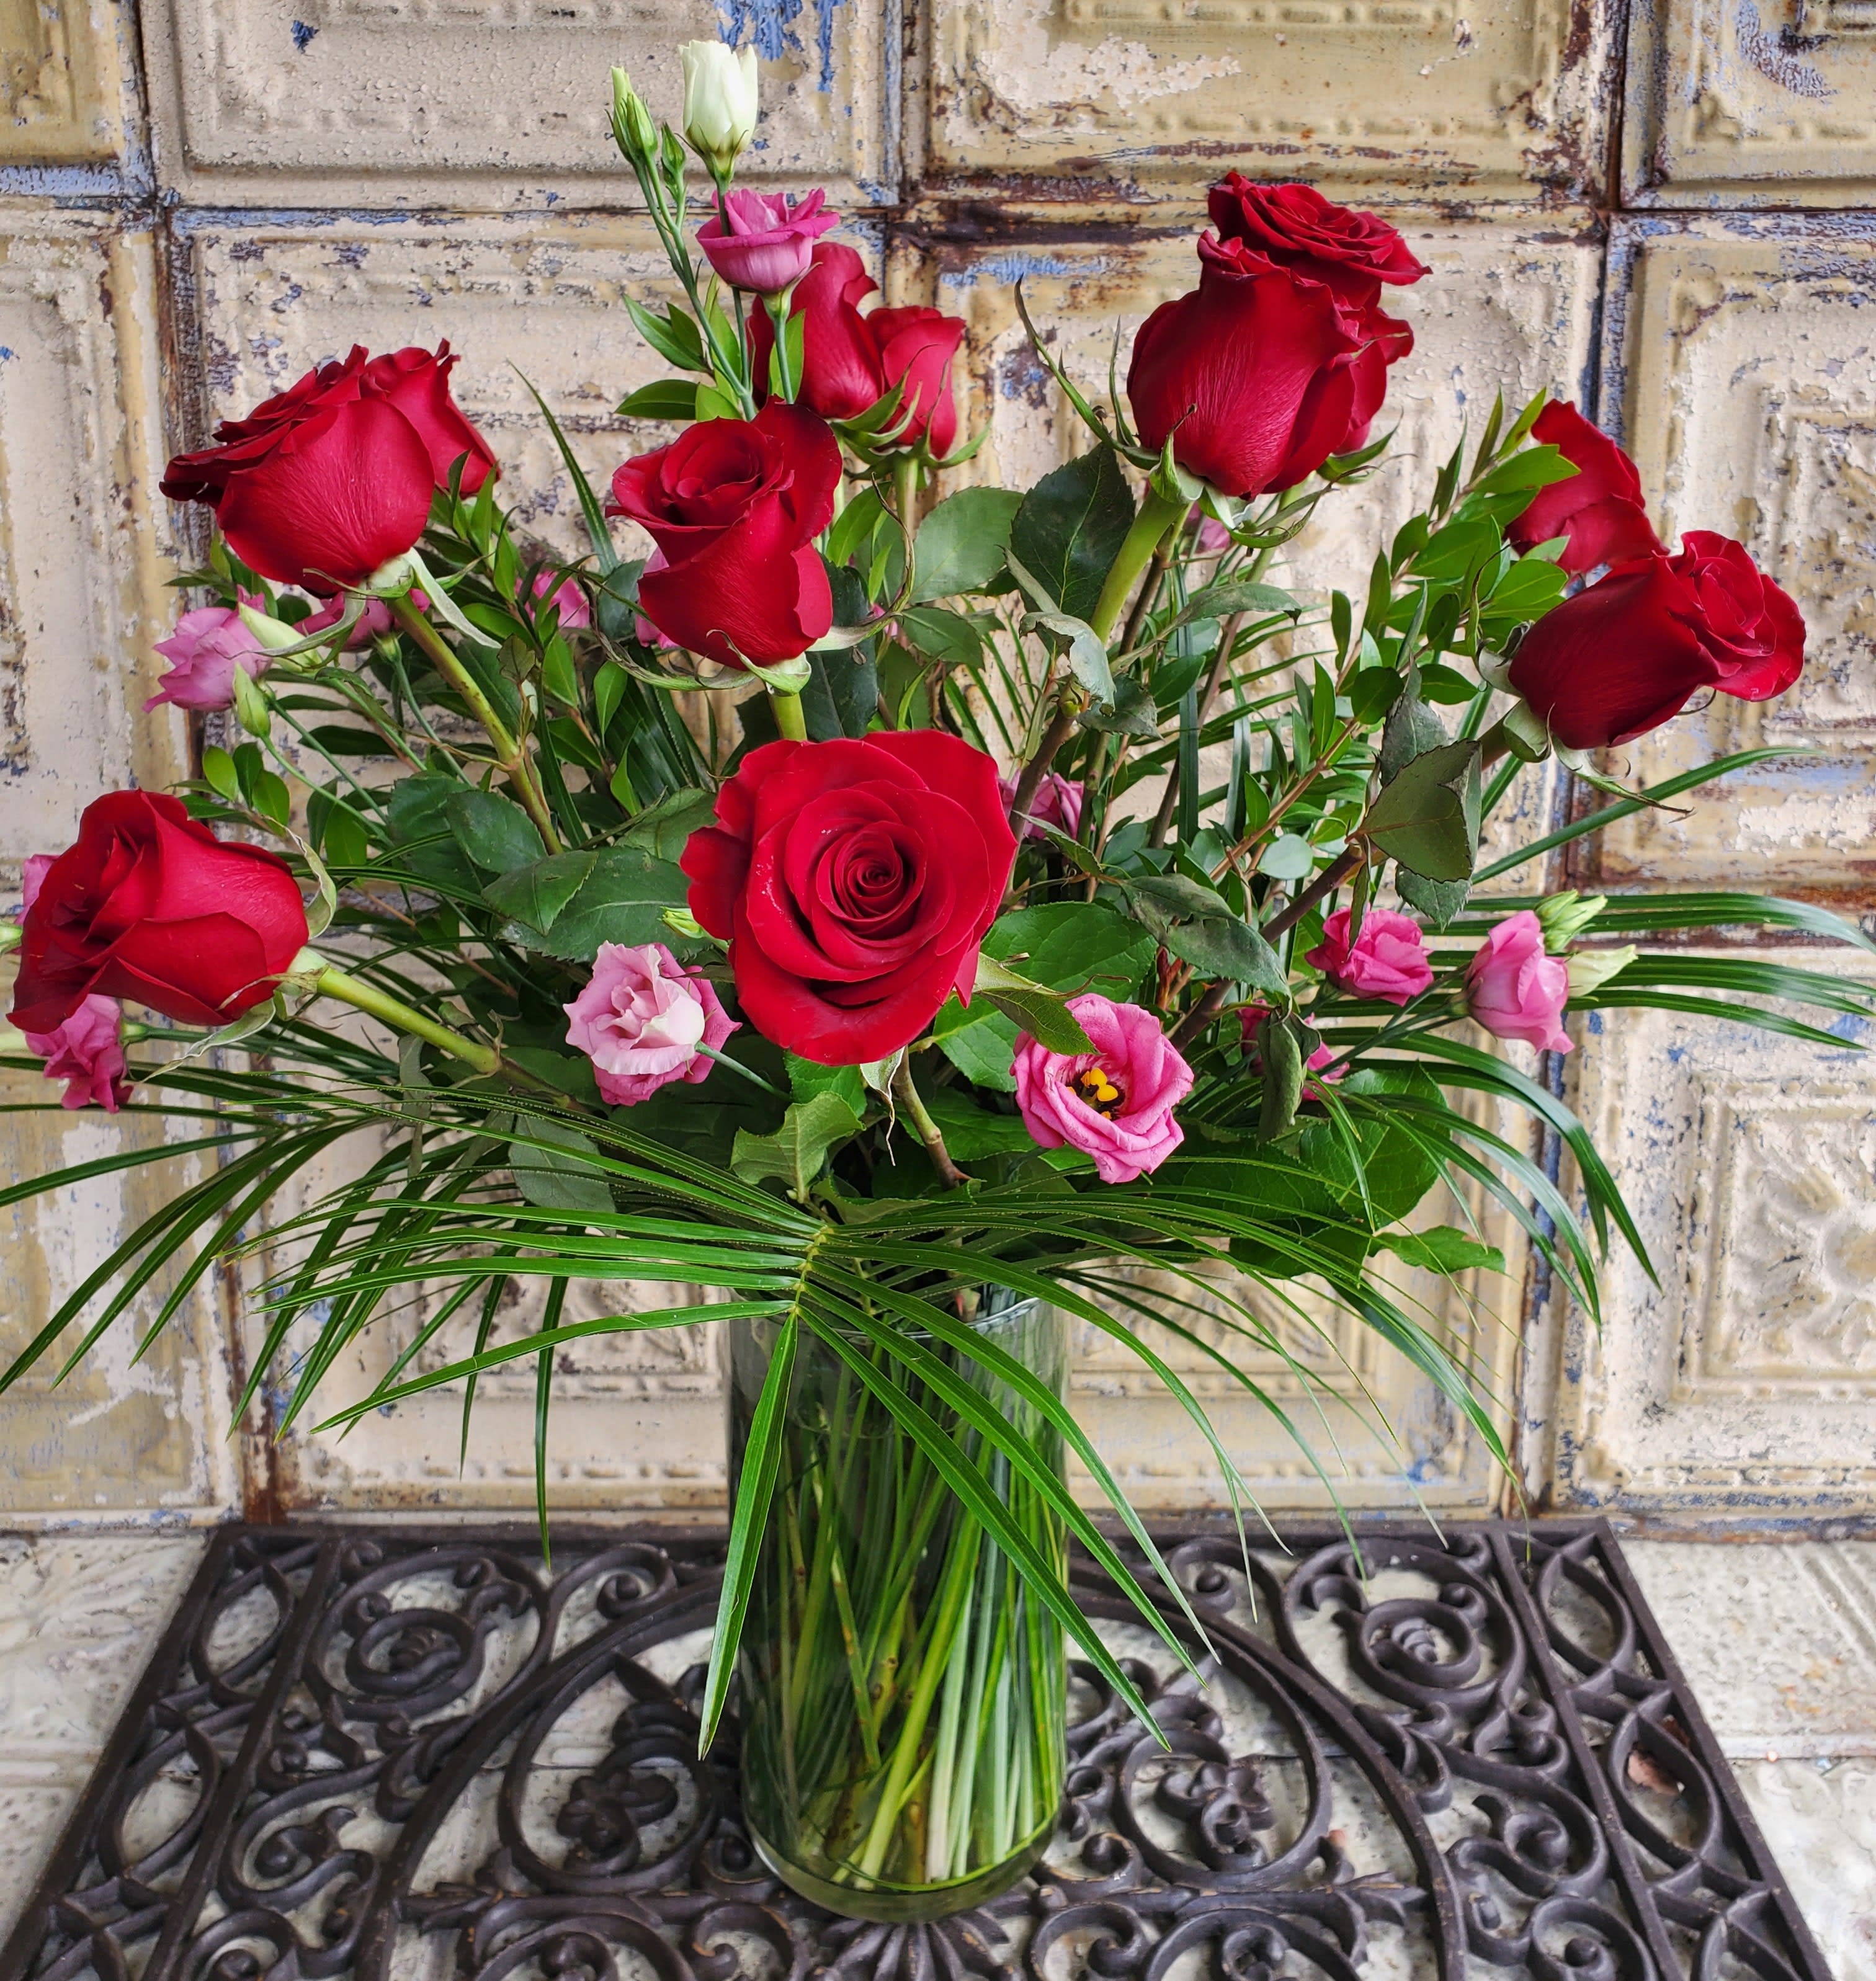 Cupid - Give the gift of classic long-stem red roses with filler to show love.